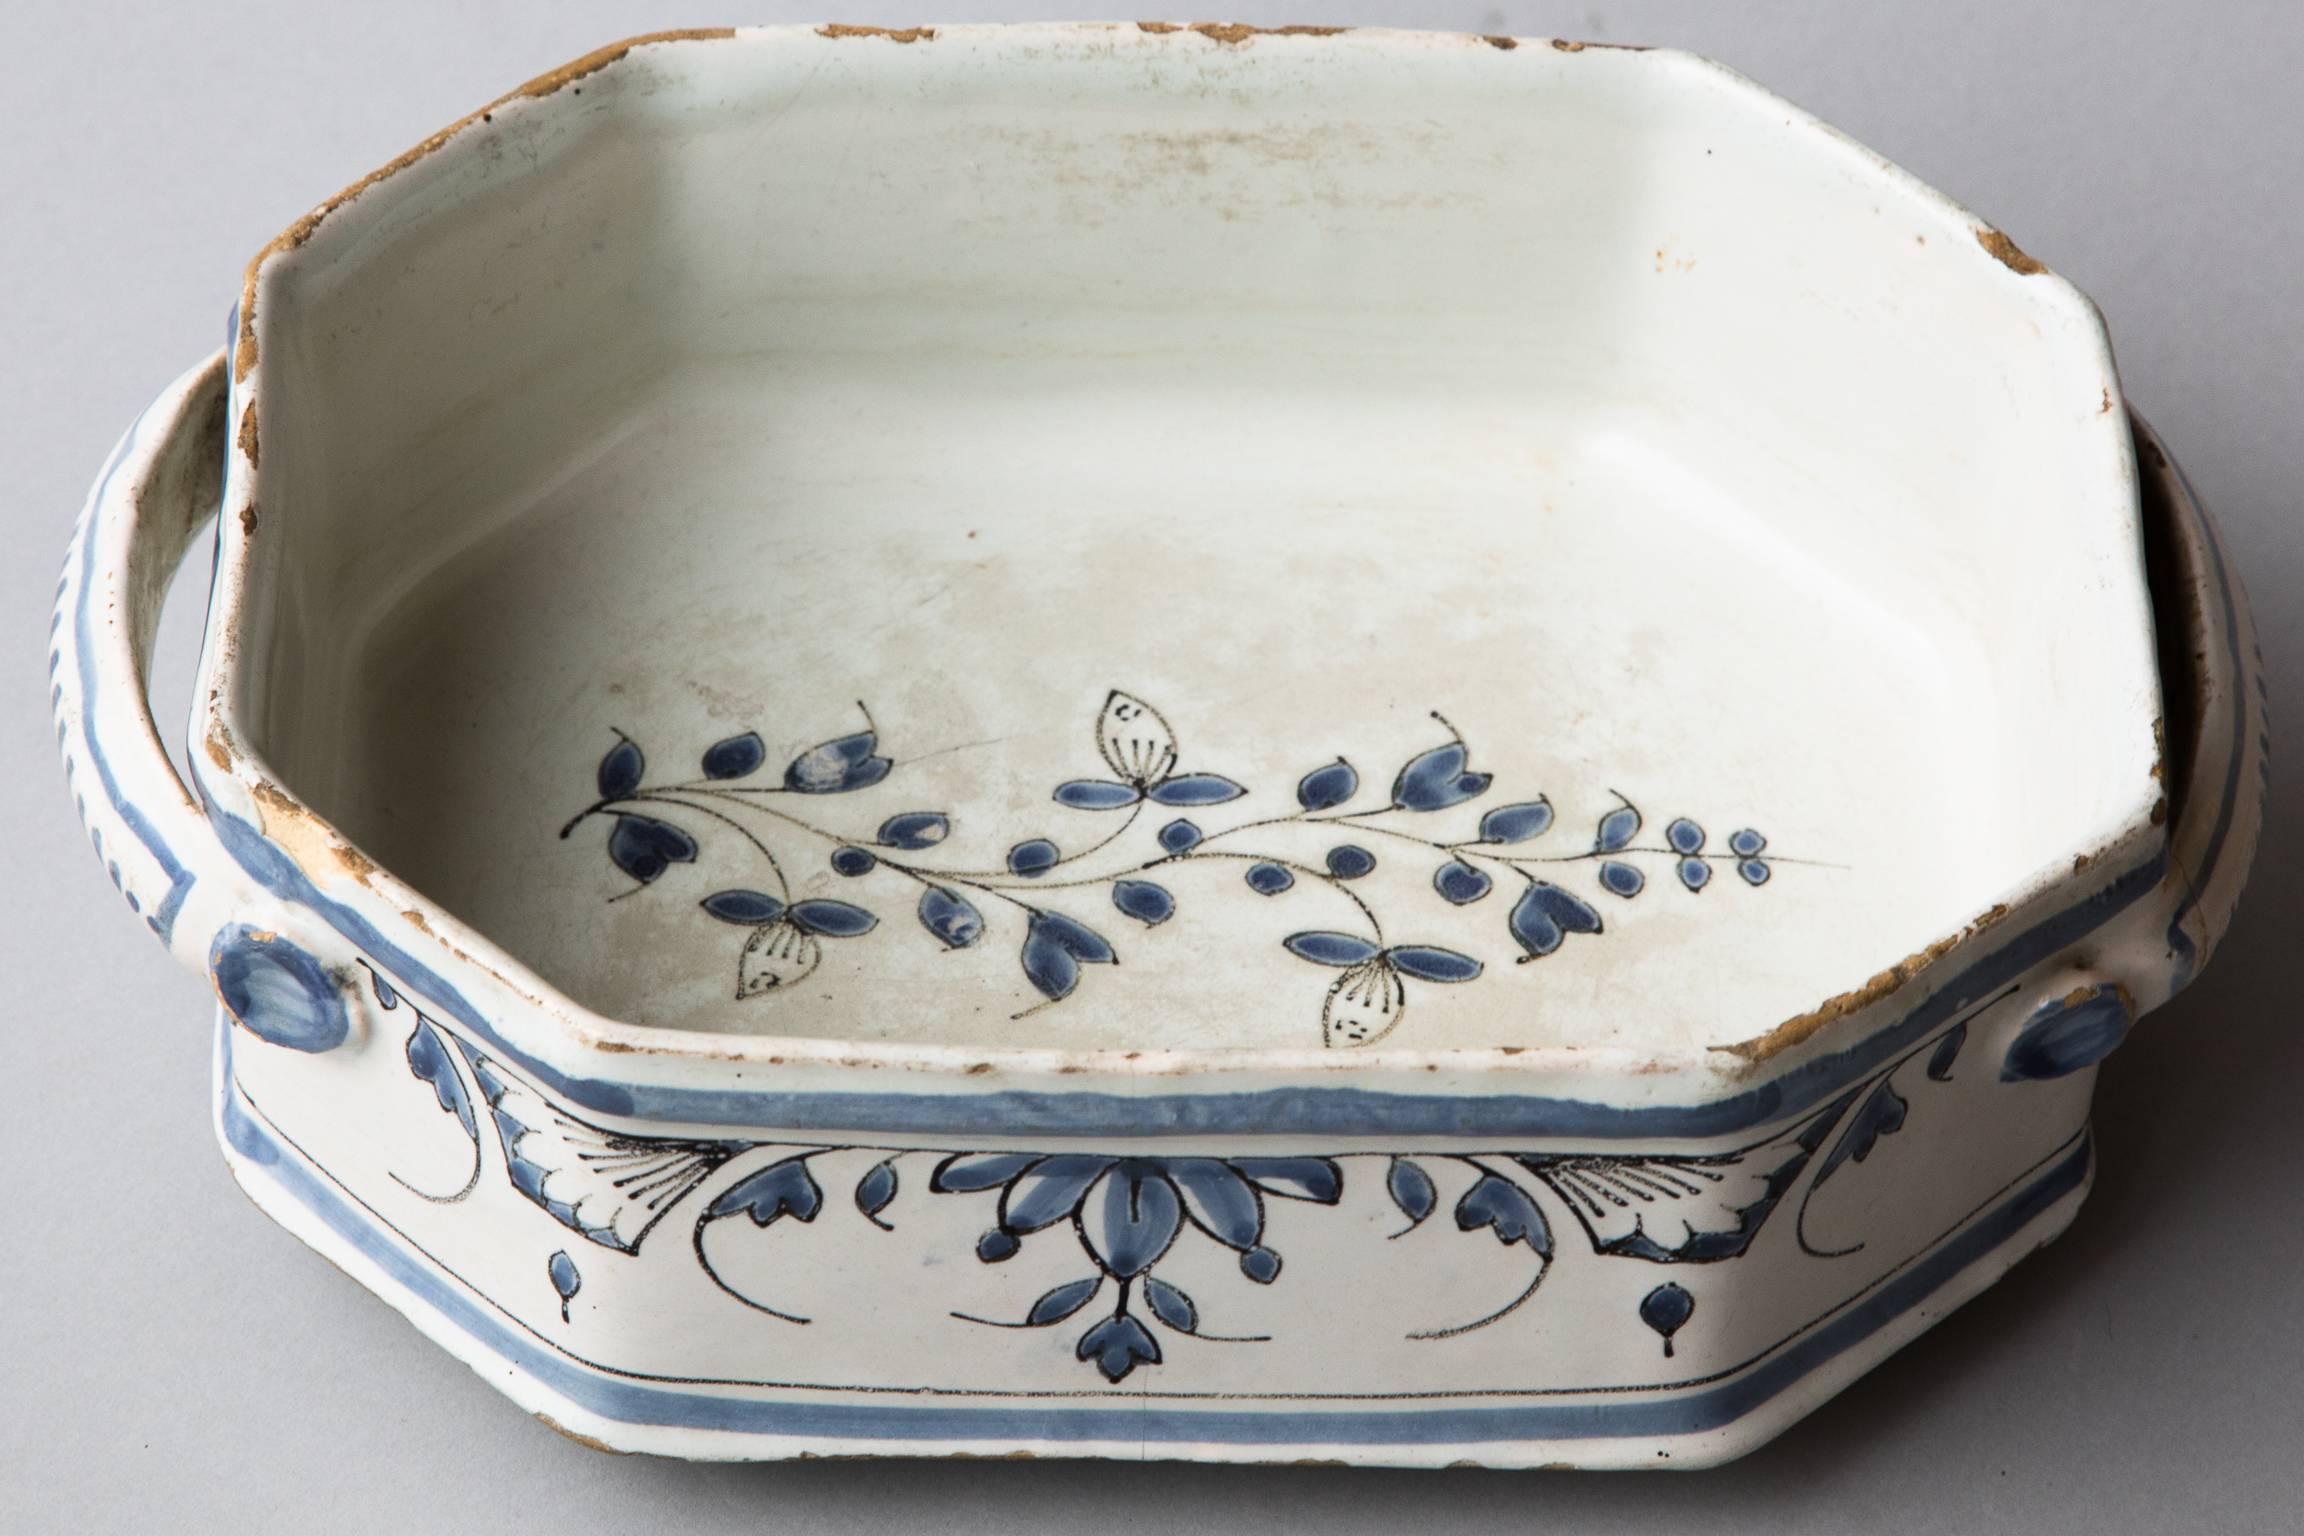 The octagonal body standing on three bun feet with two handles at either end. 
Decorated with geometric floral designs in blue and black on a milky white background. 
Rouen, France circa 1760. Old chips and scratches to the glaze and an old repair